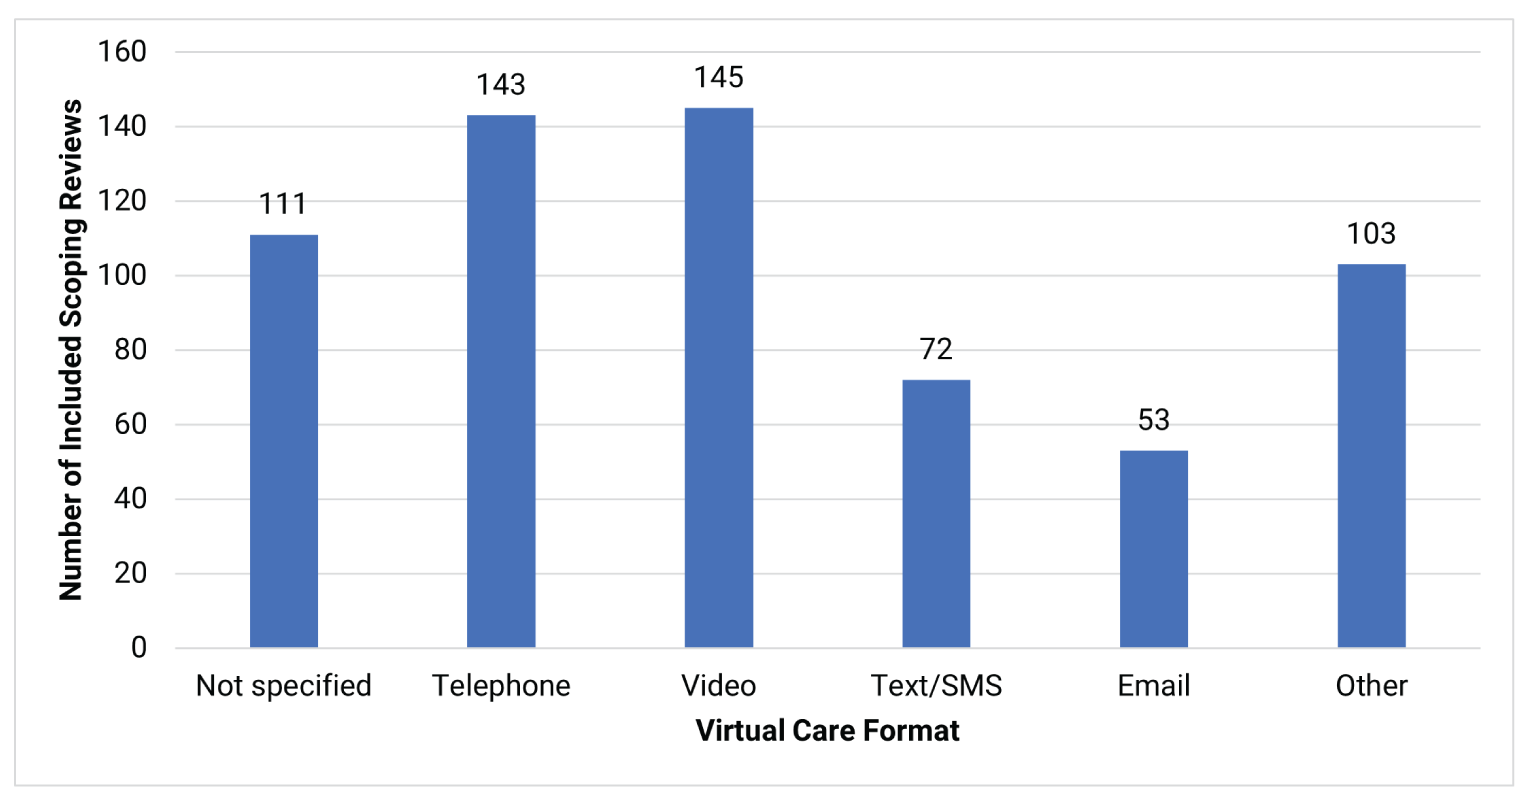 A bar graph showing the number of included scoping reviews that described virtual care format. One hundred and eleven scoping reviews did not report virtual care format for at least 1 of the relevant studies included in their review. One hundred and forty-three scoping reviews reported about studies that used telephone, 145 scoping reviews reported about studies that used video, 72 scoping reviews reported about studies that used text or short message service, 53 scoping reviews reported about studies that used email, and 103 scoping reviews reported about studies that used another virtual care format.